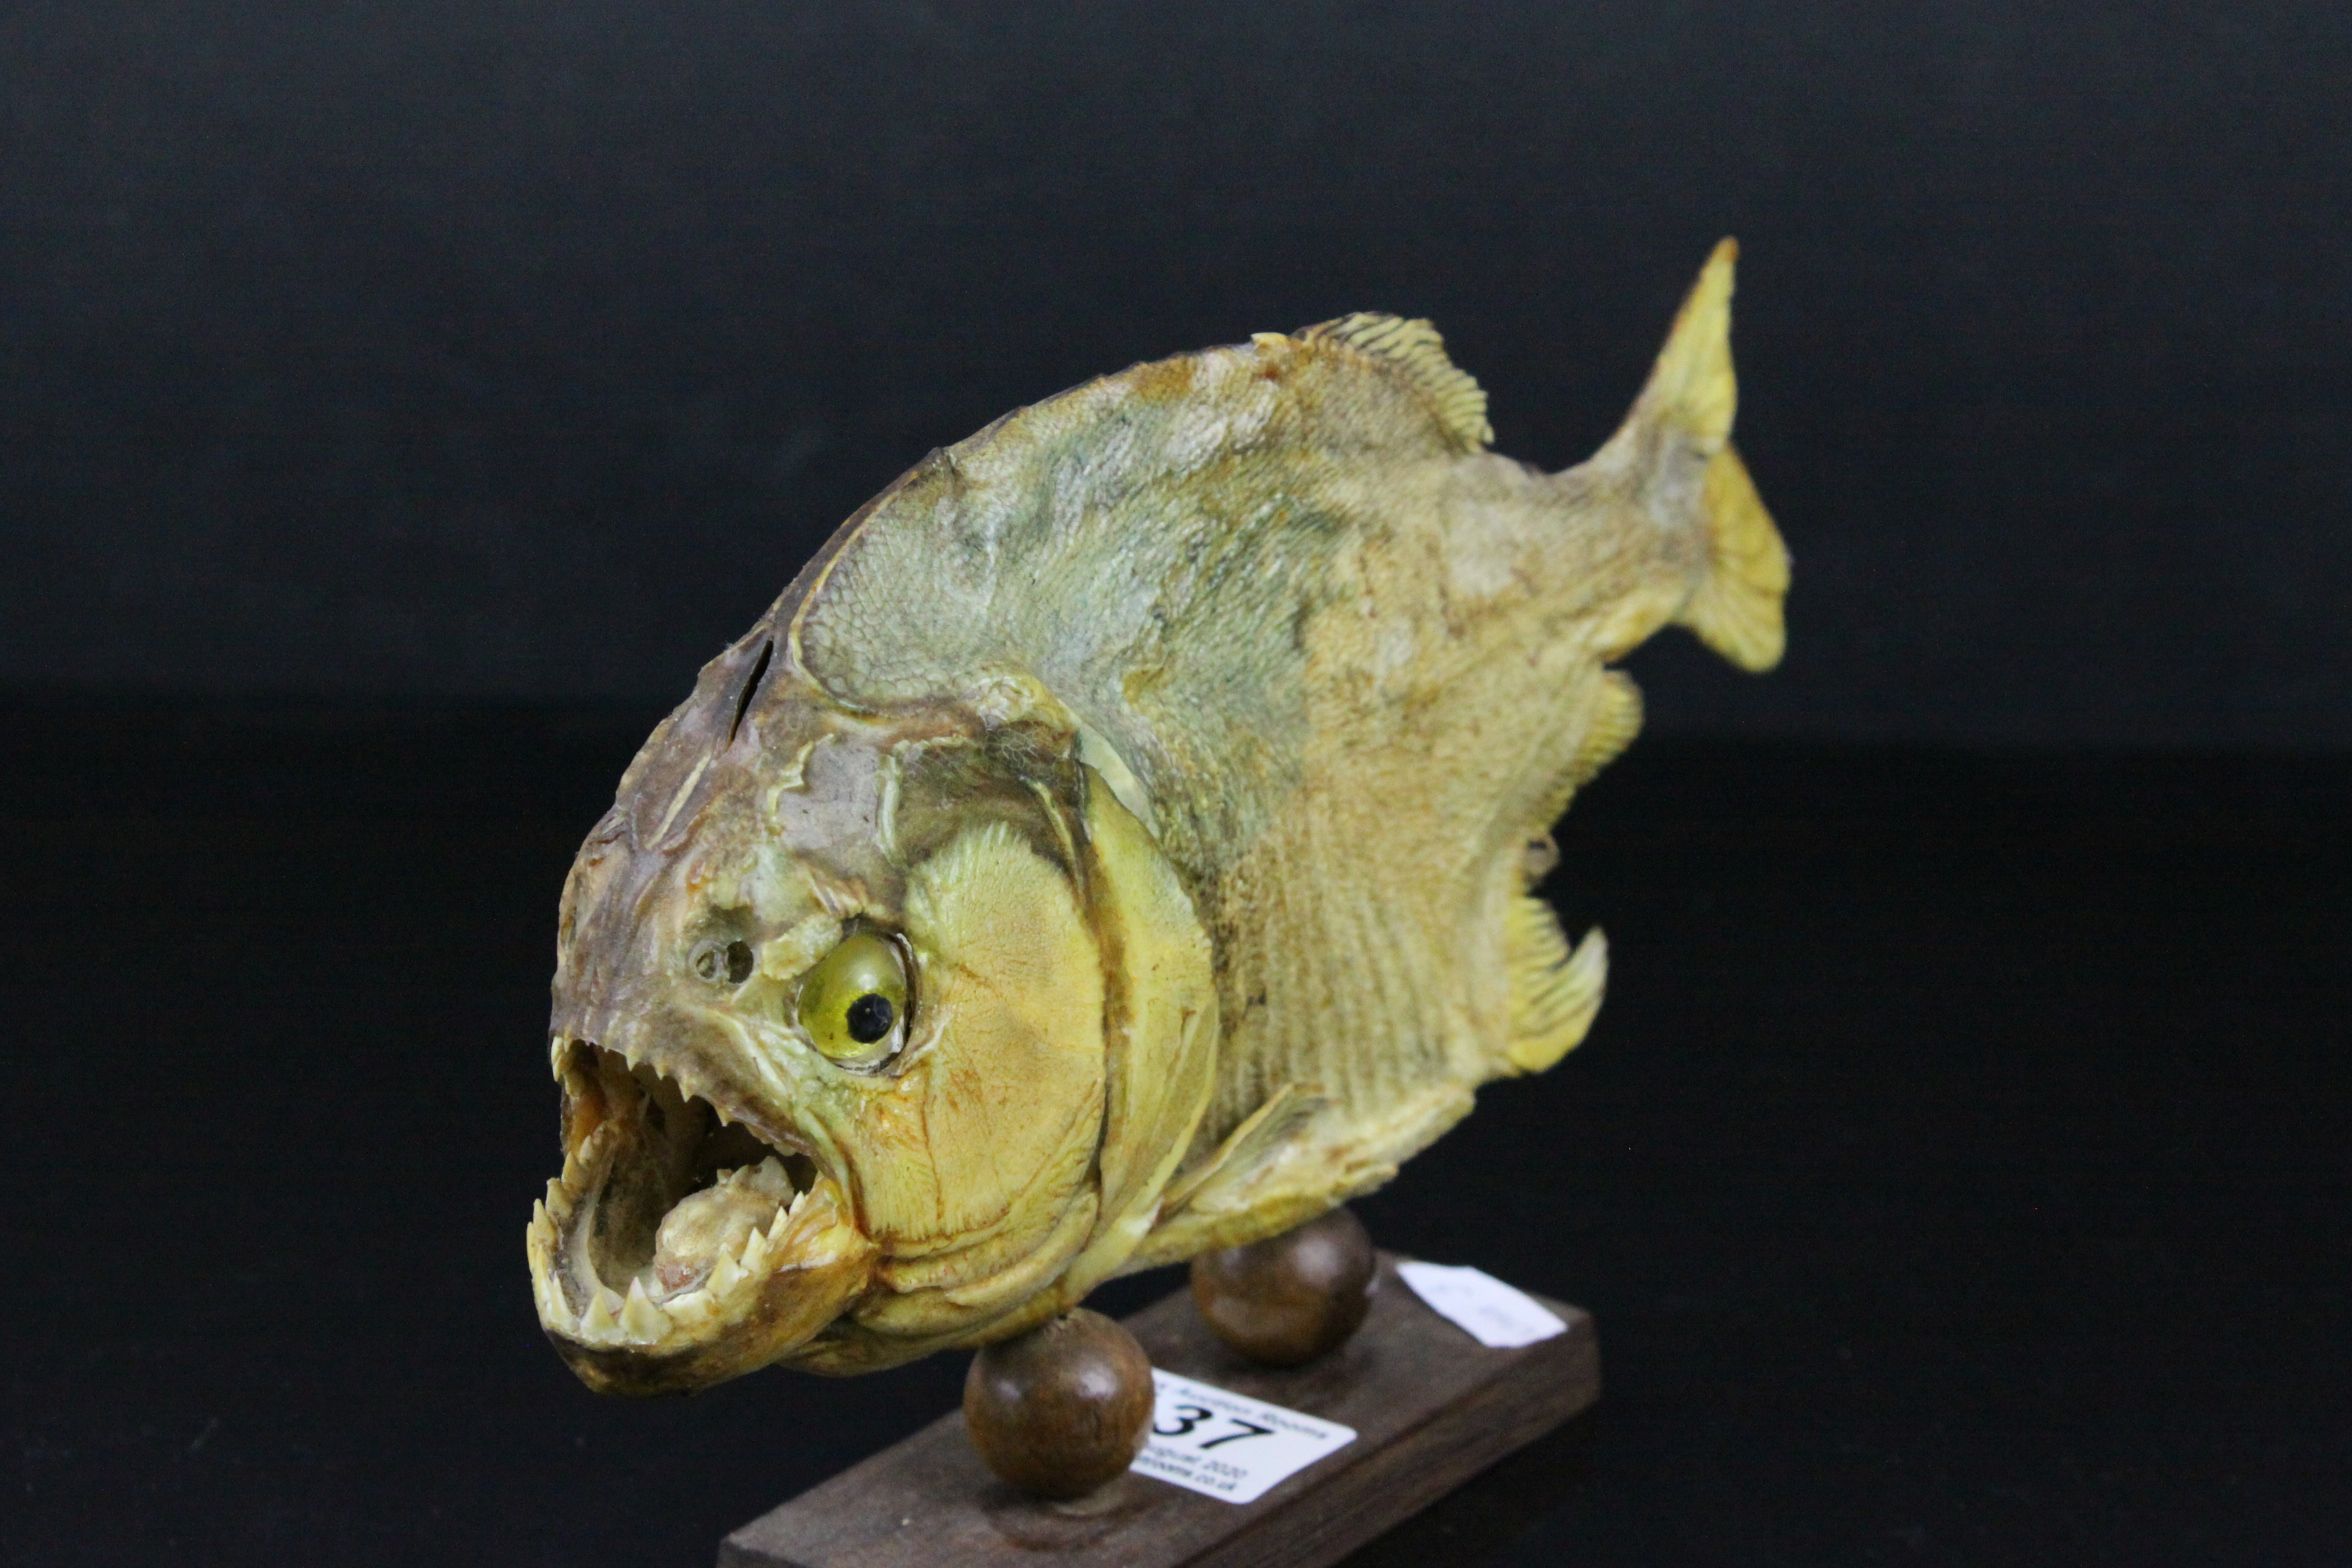 Taxidermy Piranha Fish mounted on a Wooden Stand, 28cms long - Image 6 of 6